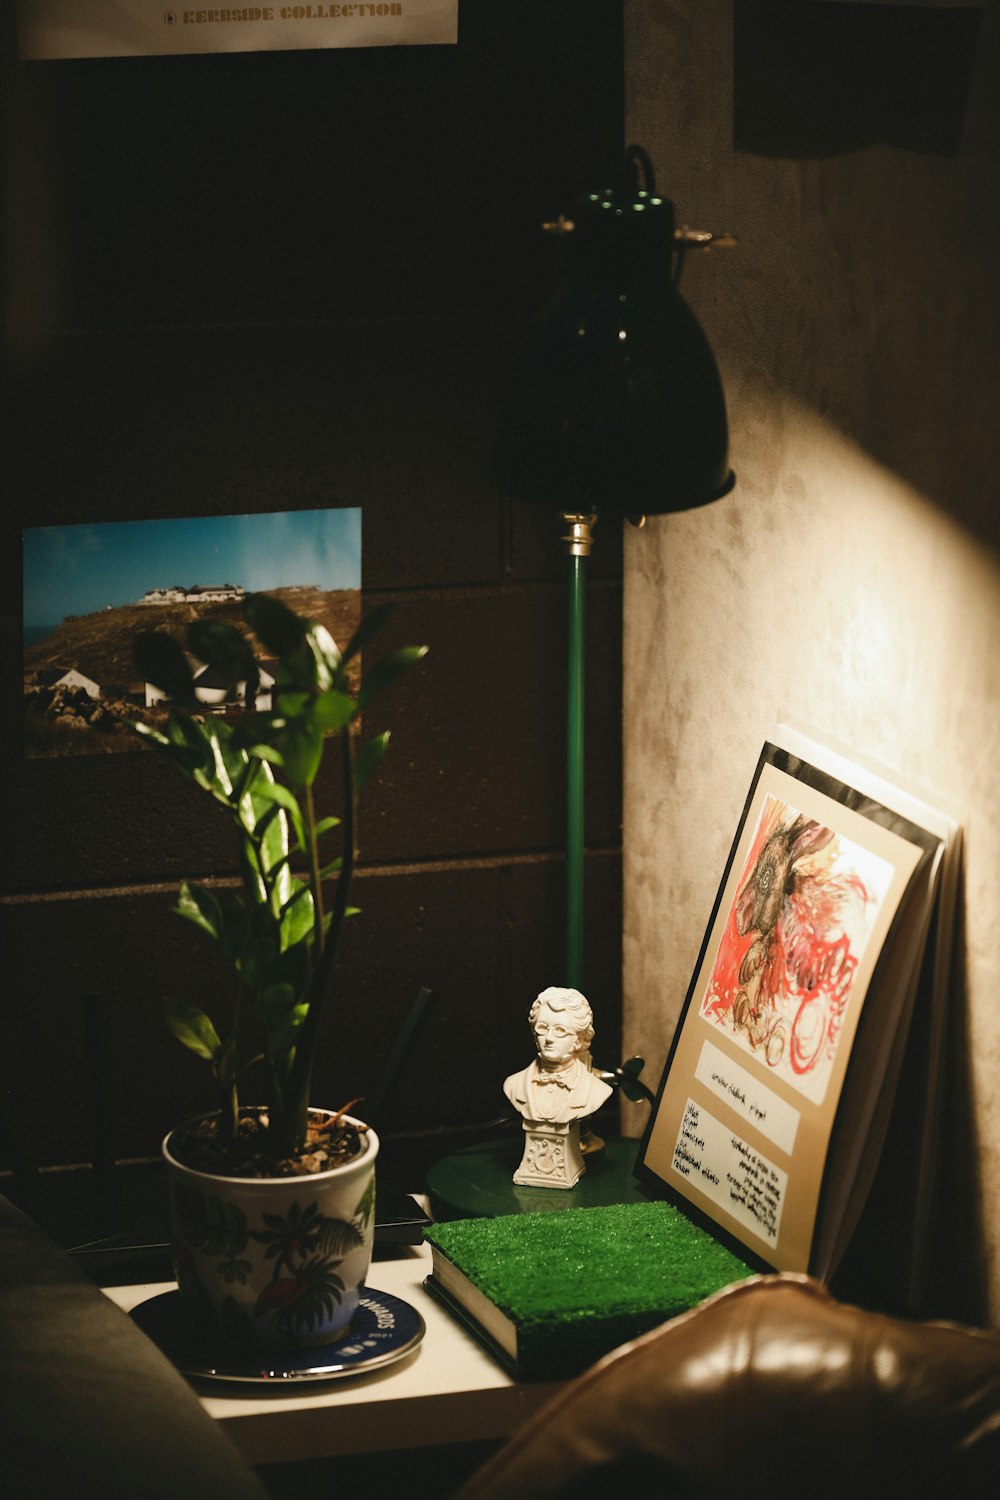 a potted plant sitting on a table next to a picture